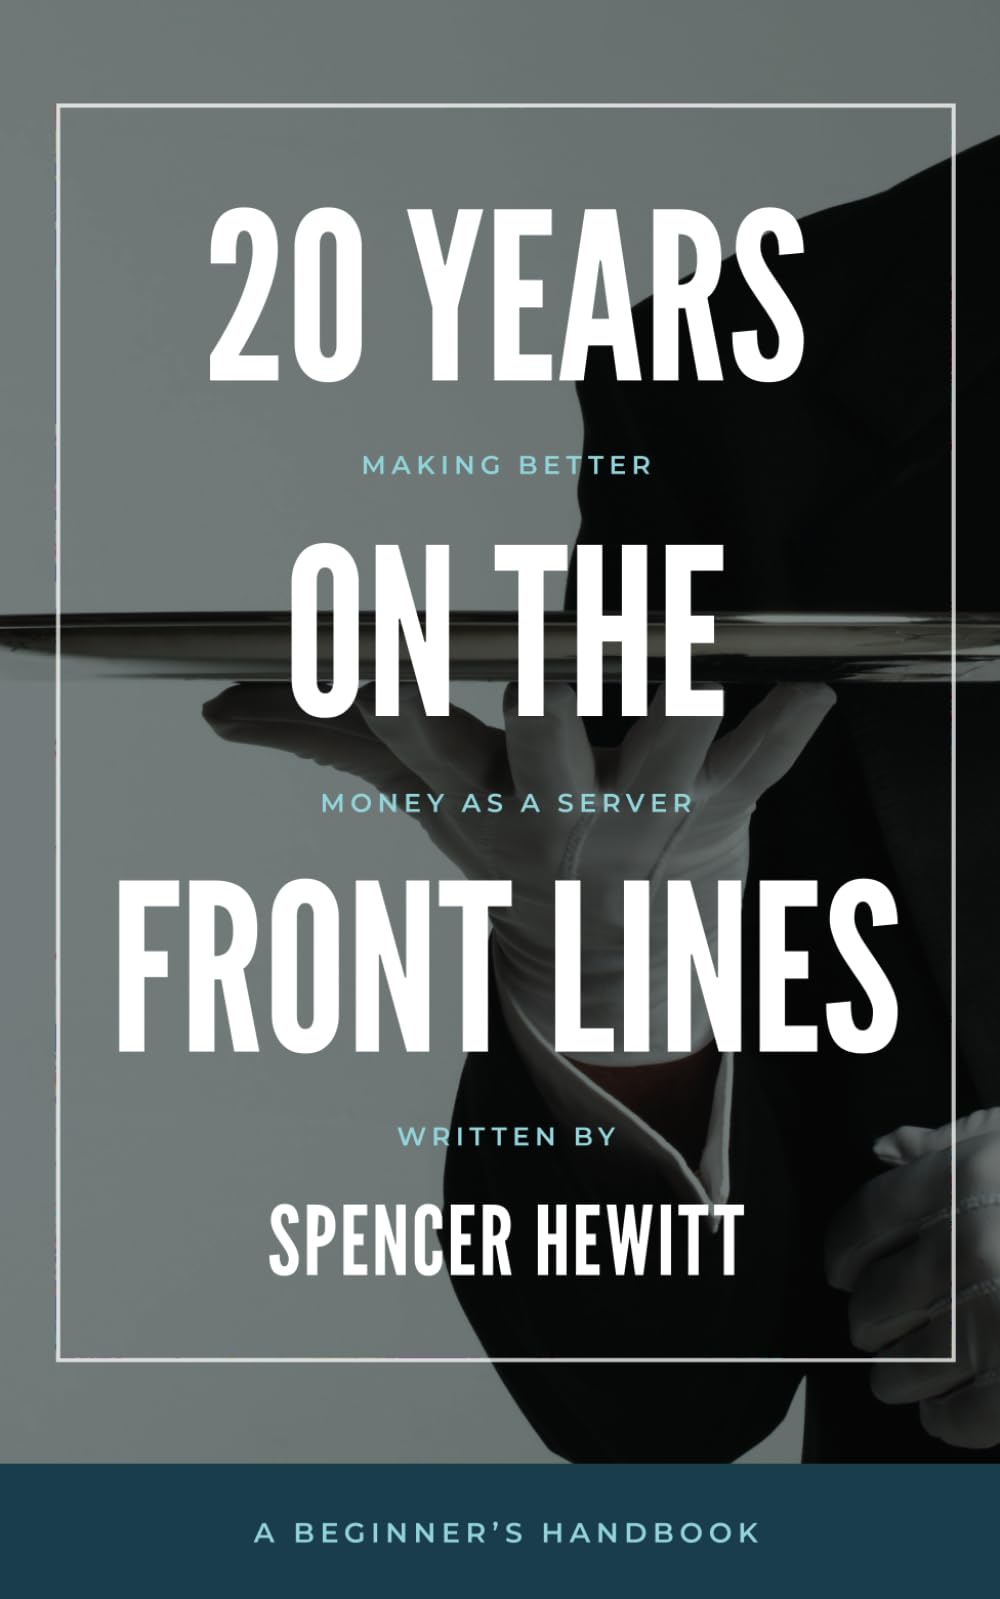 20 Years on the Front Lines: Making Better Money as a Server